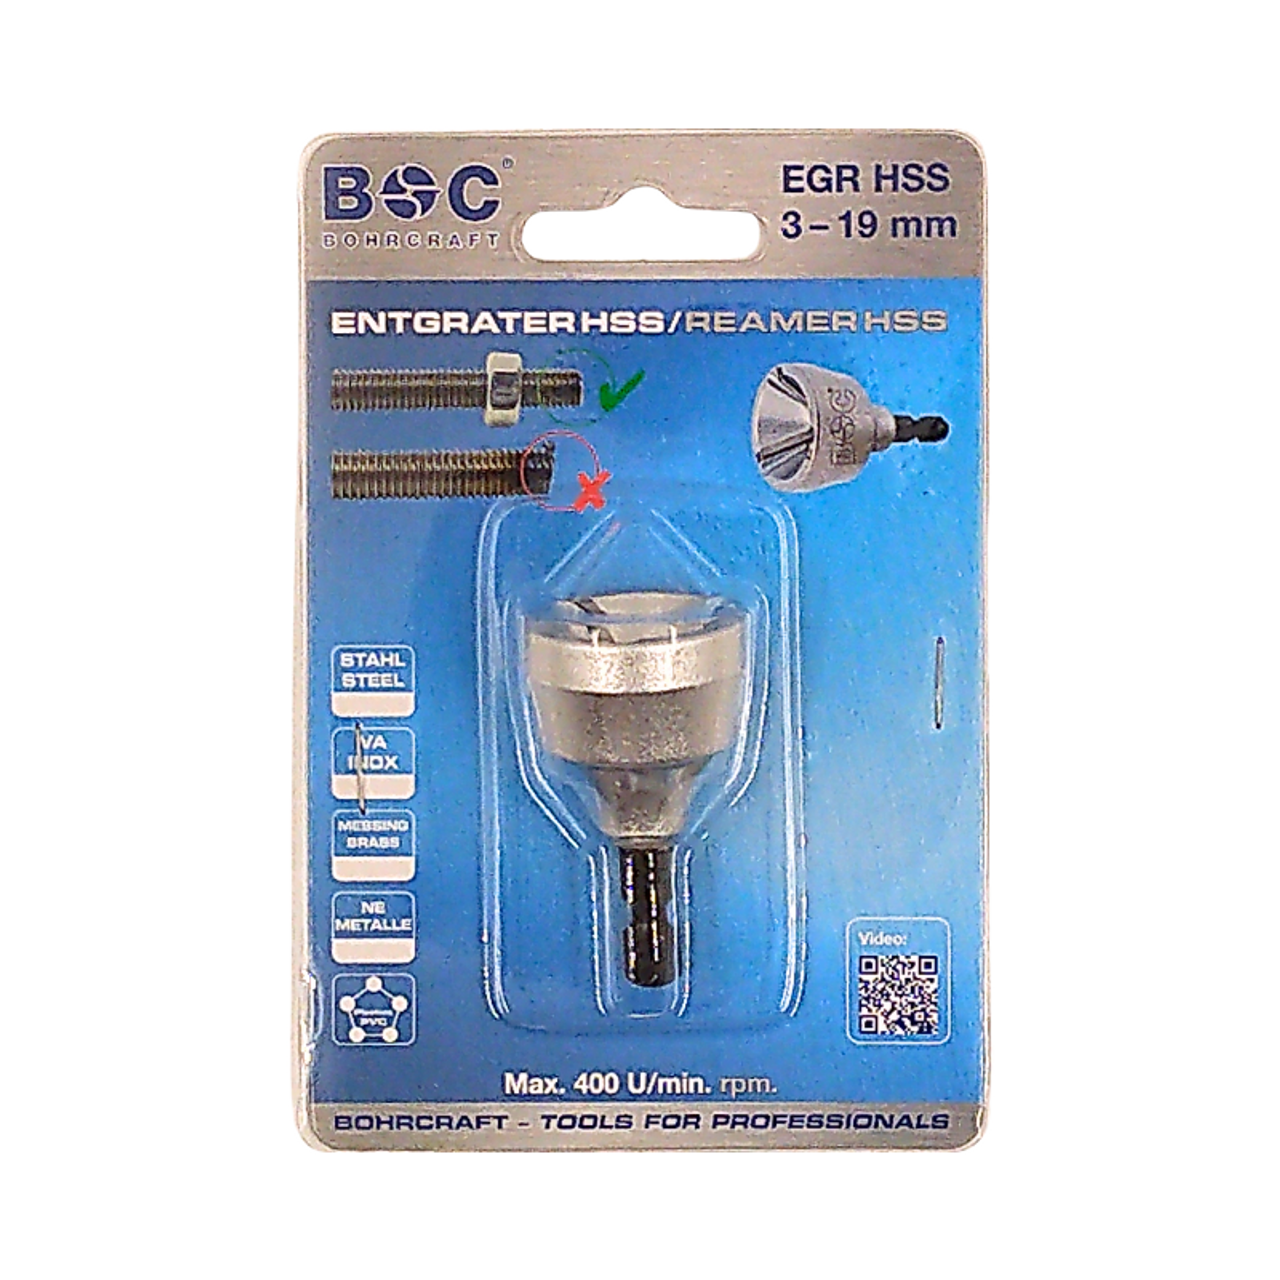 BOHRCRAFT Reamer | Supplier of 1648 HSS Bolt Thread Reamer  for 3-19mm, Damaged Bolts, Screws and Fasteners, Metalworking, Steel Fabrication and Workshops